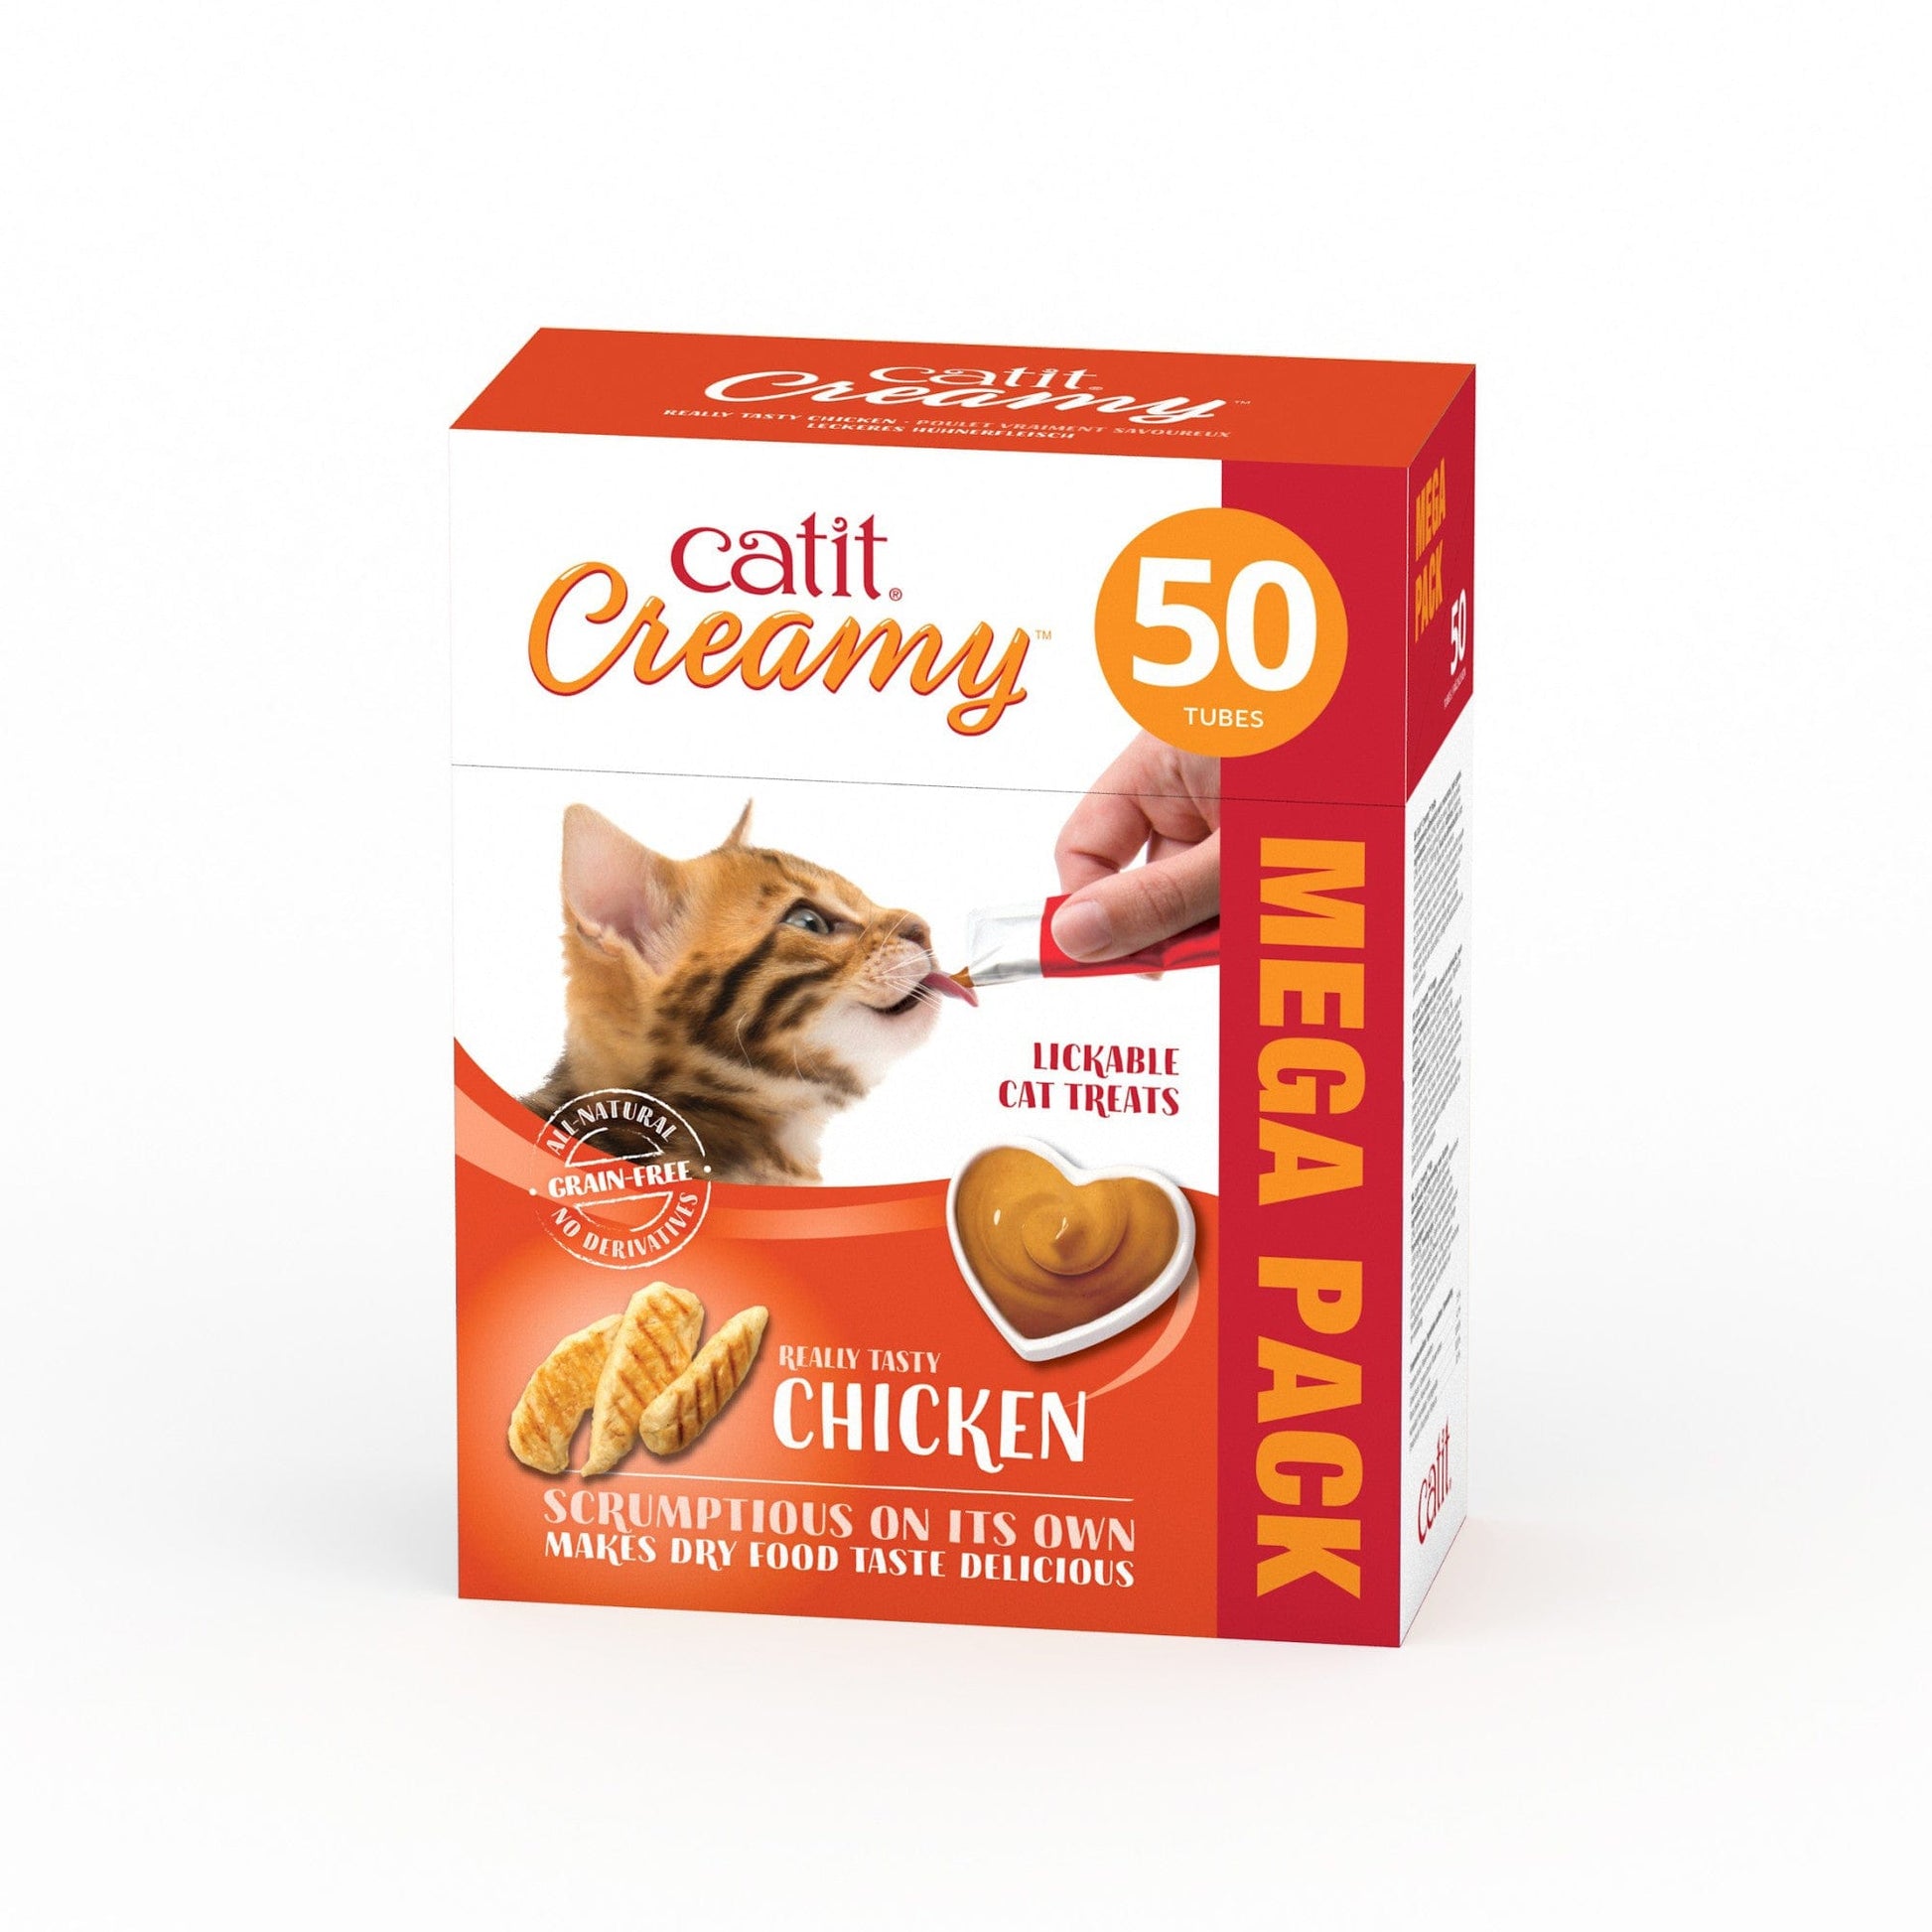 CATIT Creamy Lickable Cat Treat Chicken Tubes - product image. This is a product of Pets Villa.